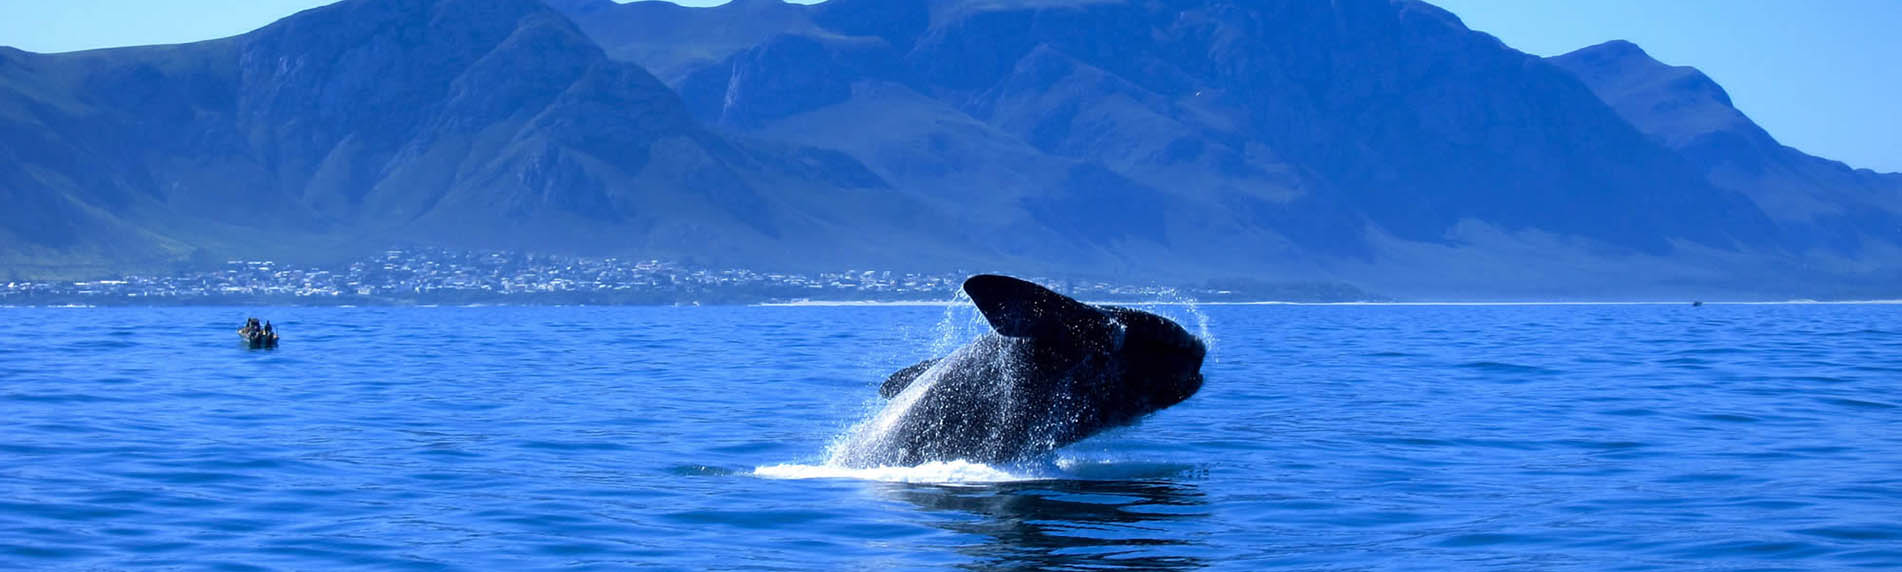 Whale Watching Tour in South Africa